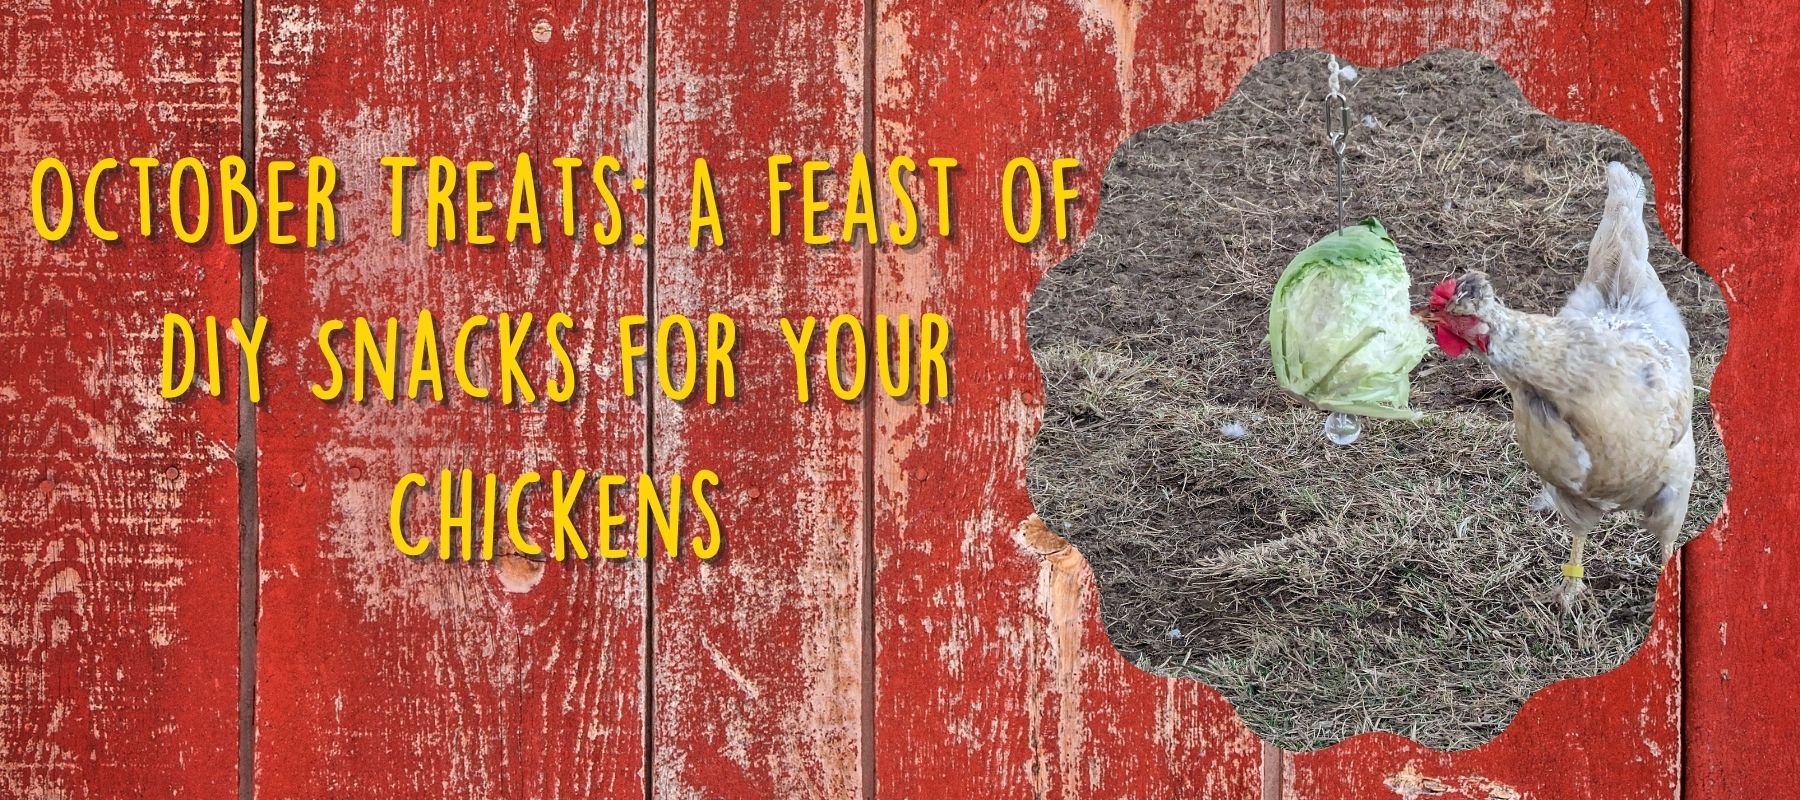 October Treats: A Feast of DIY Snacks for Your Chickens